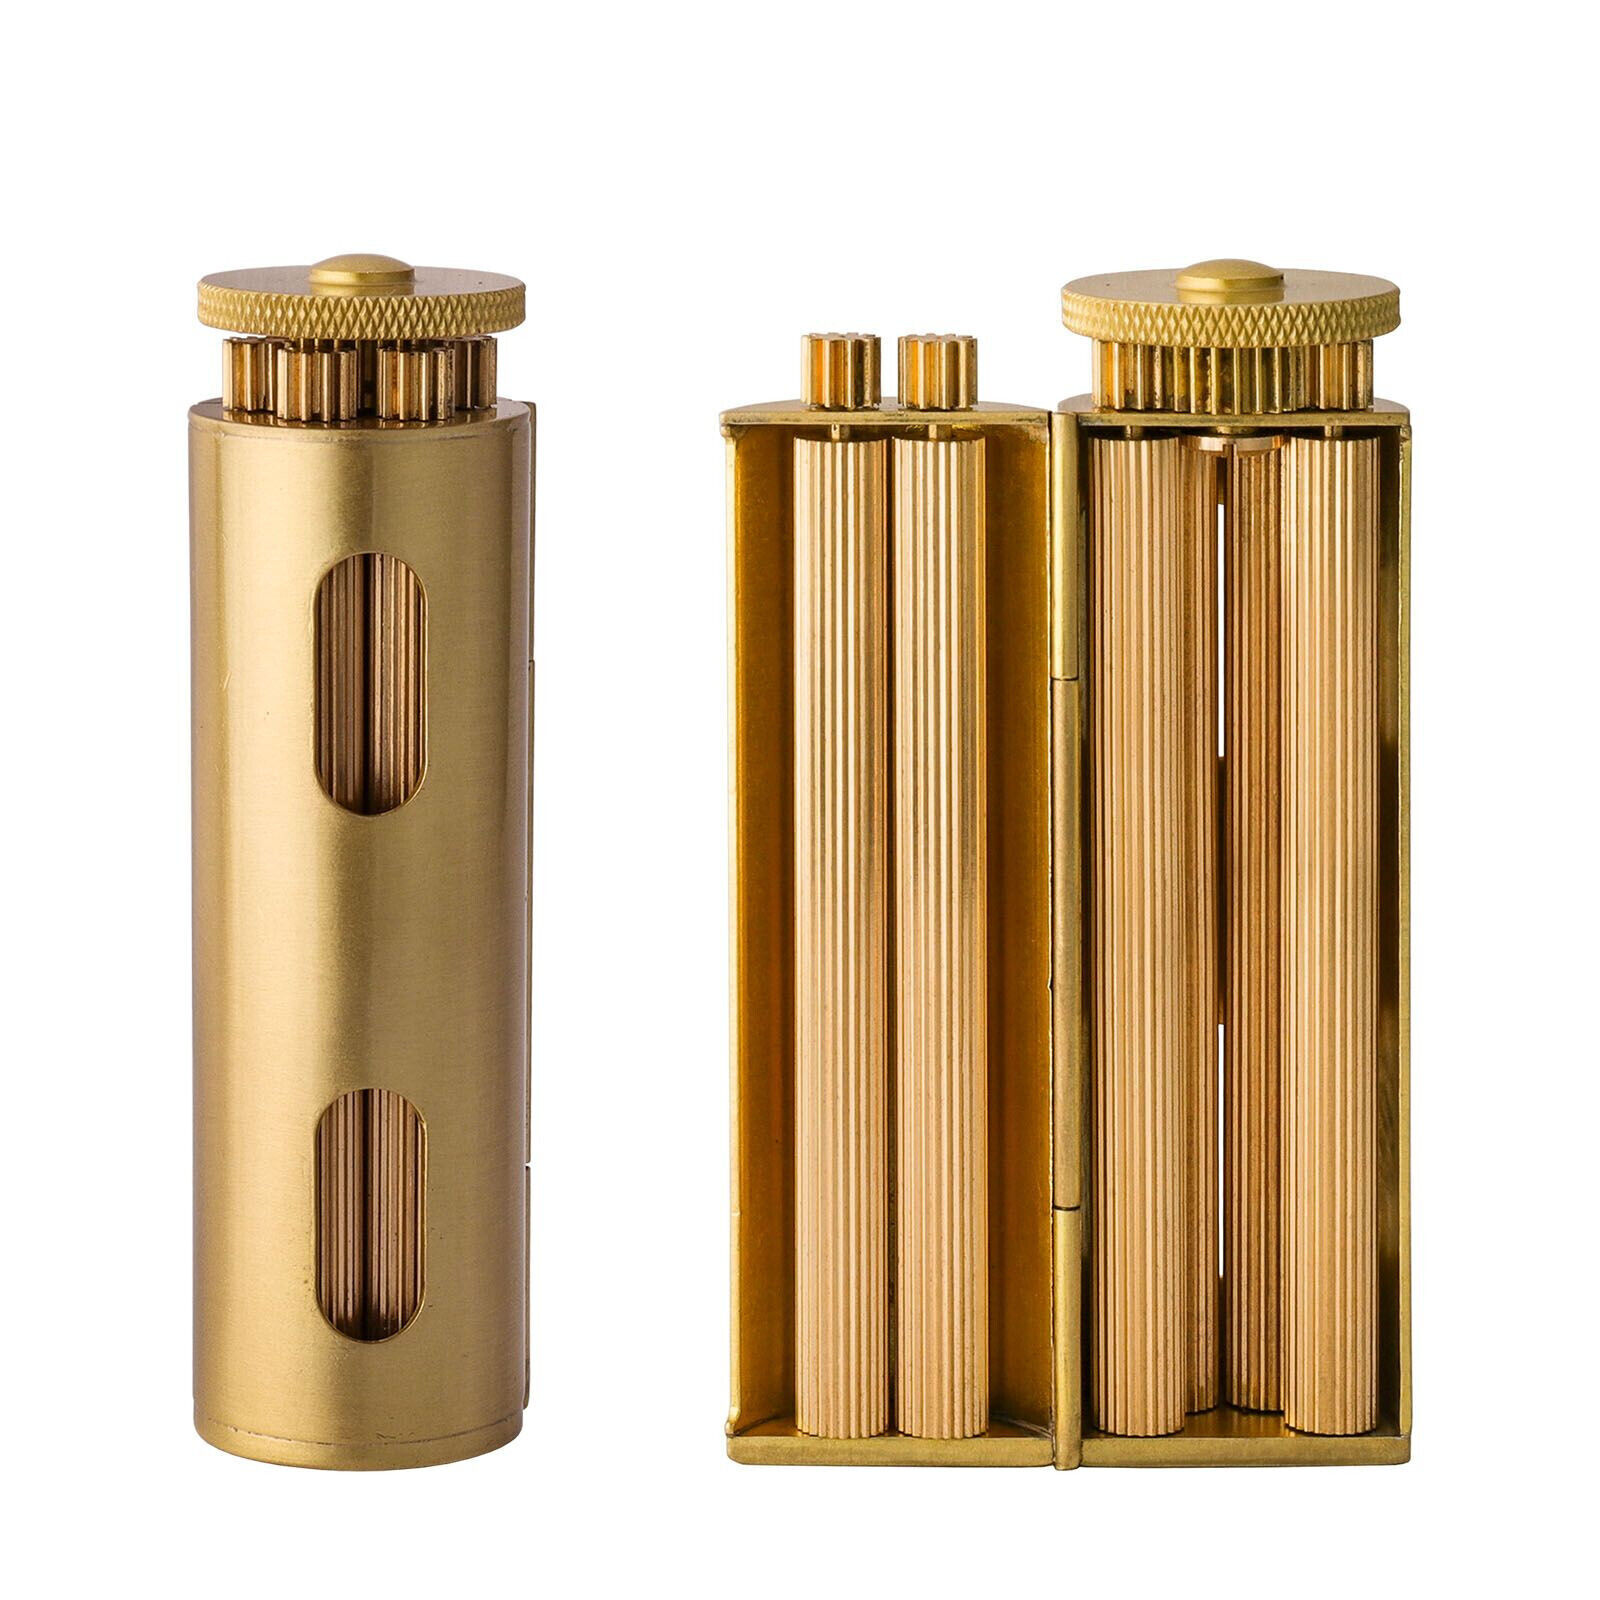 Cylindrical Solid Brass Vintage Manual Cigarette Rolling Machine Fit 70-75MM US